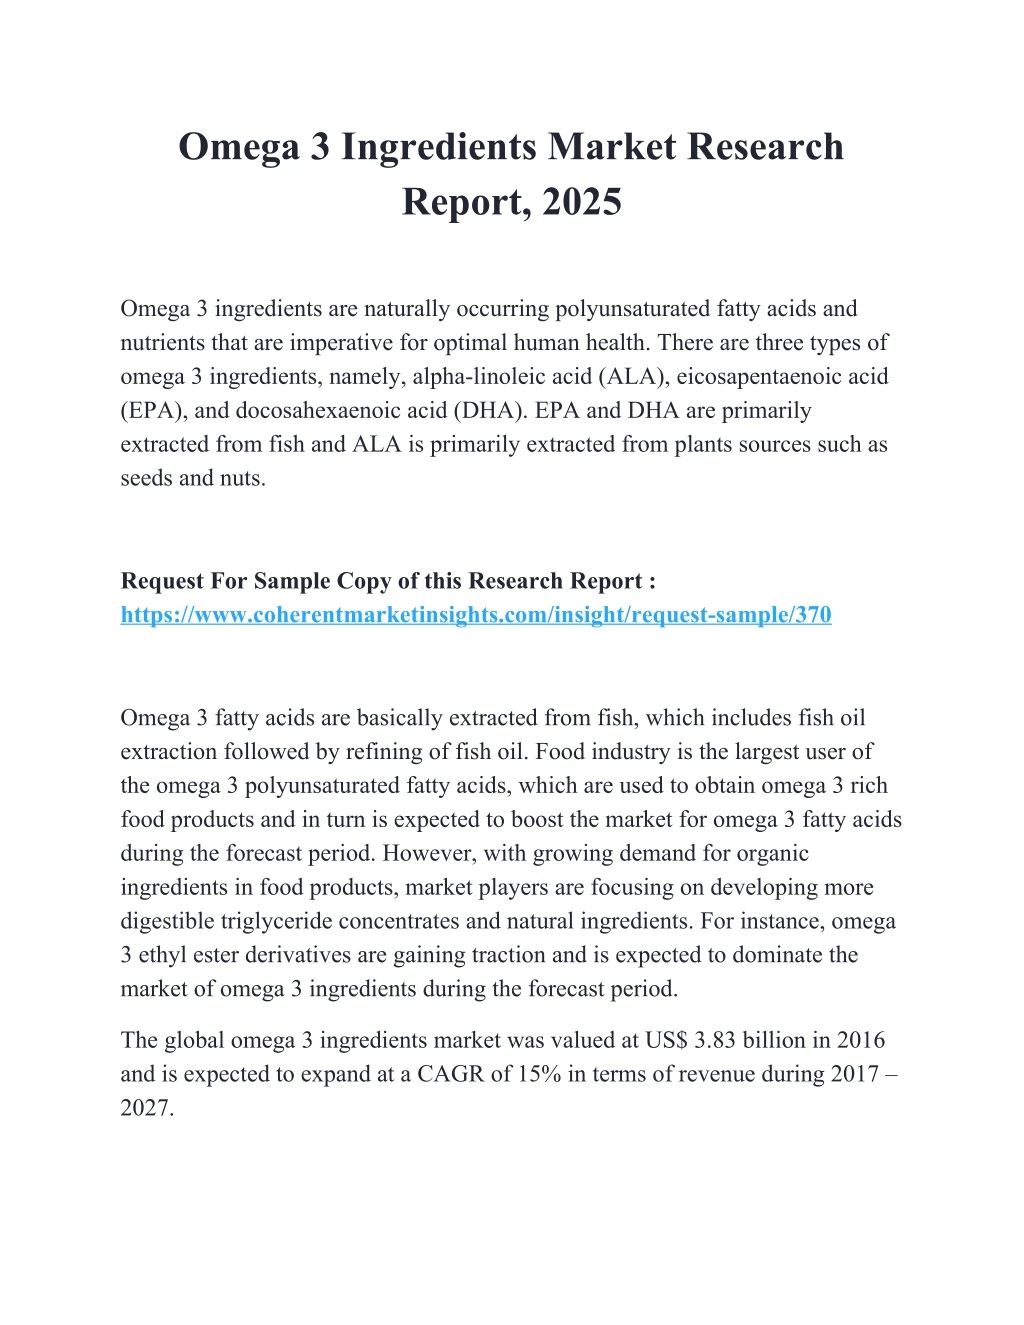 omega 3 ingredients market research report 2025